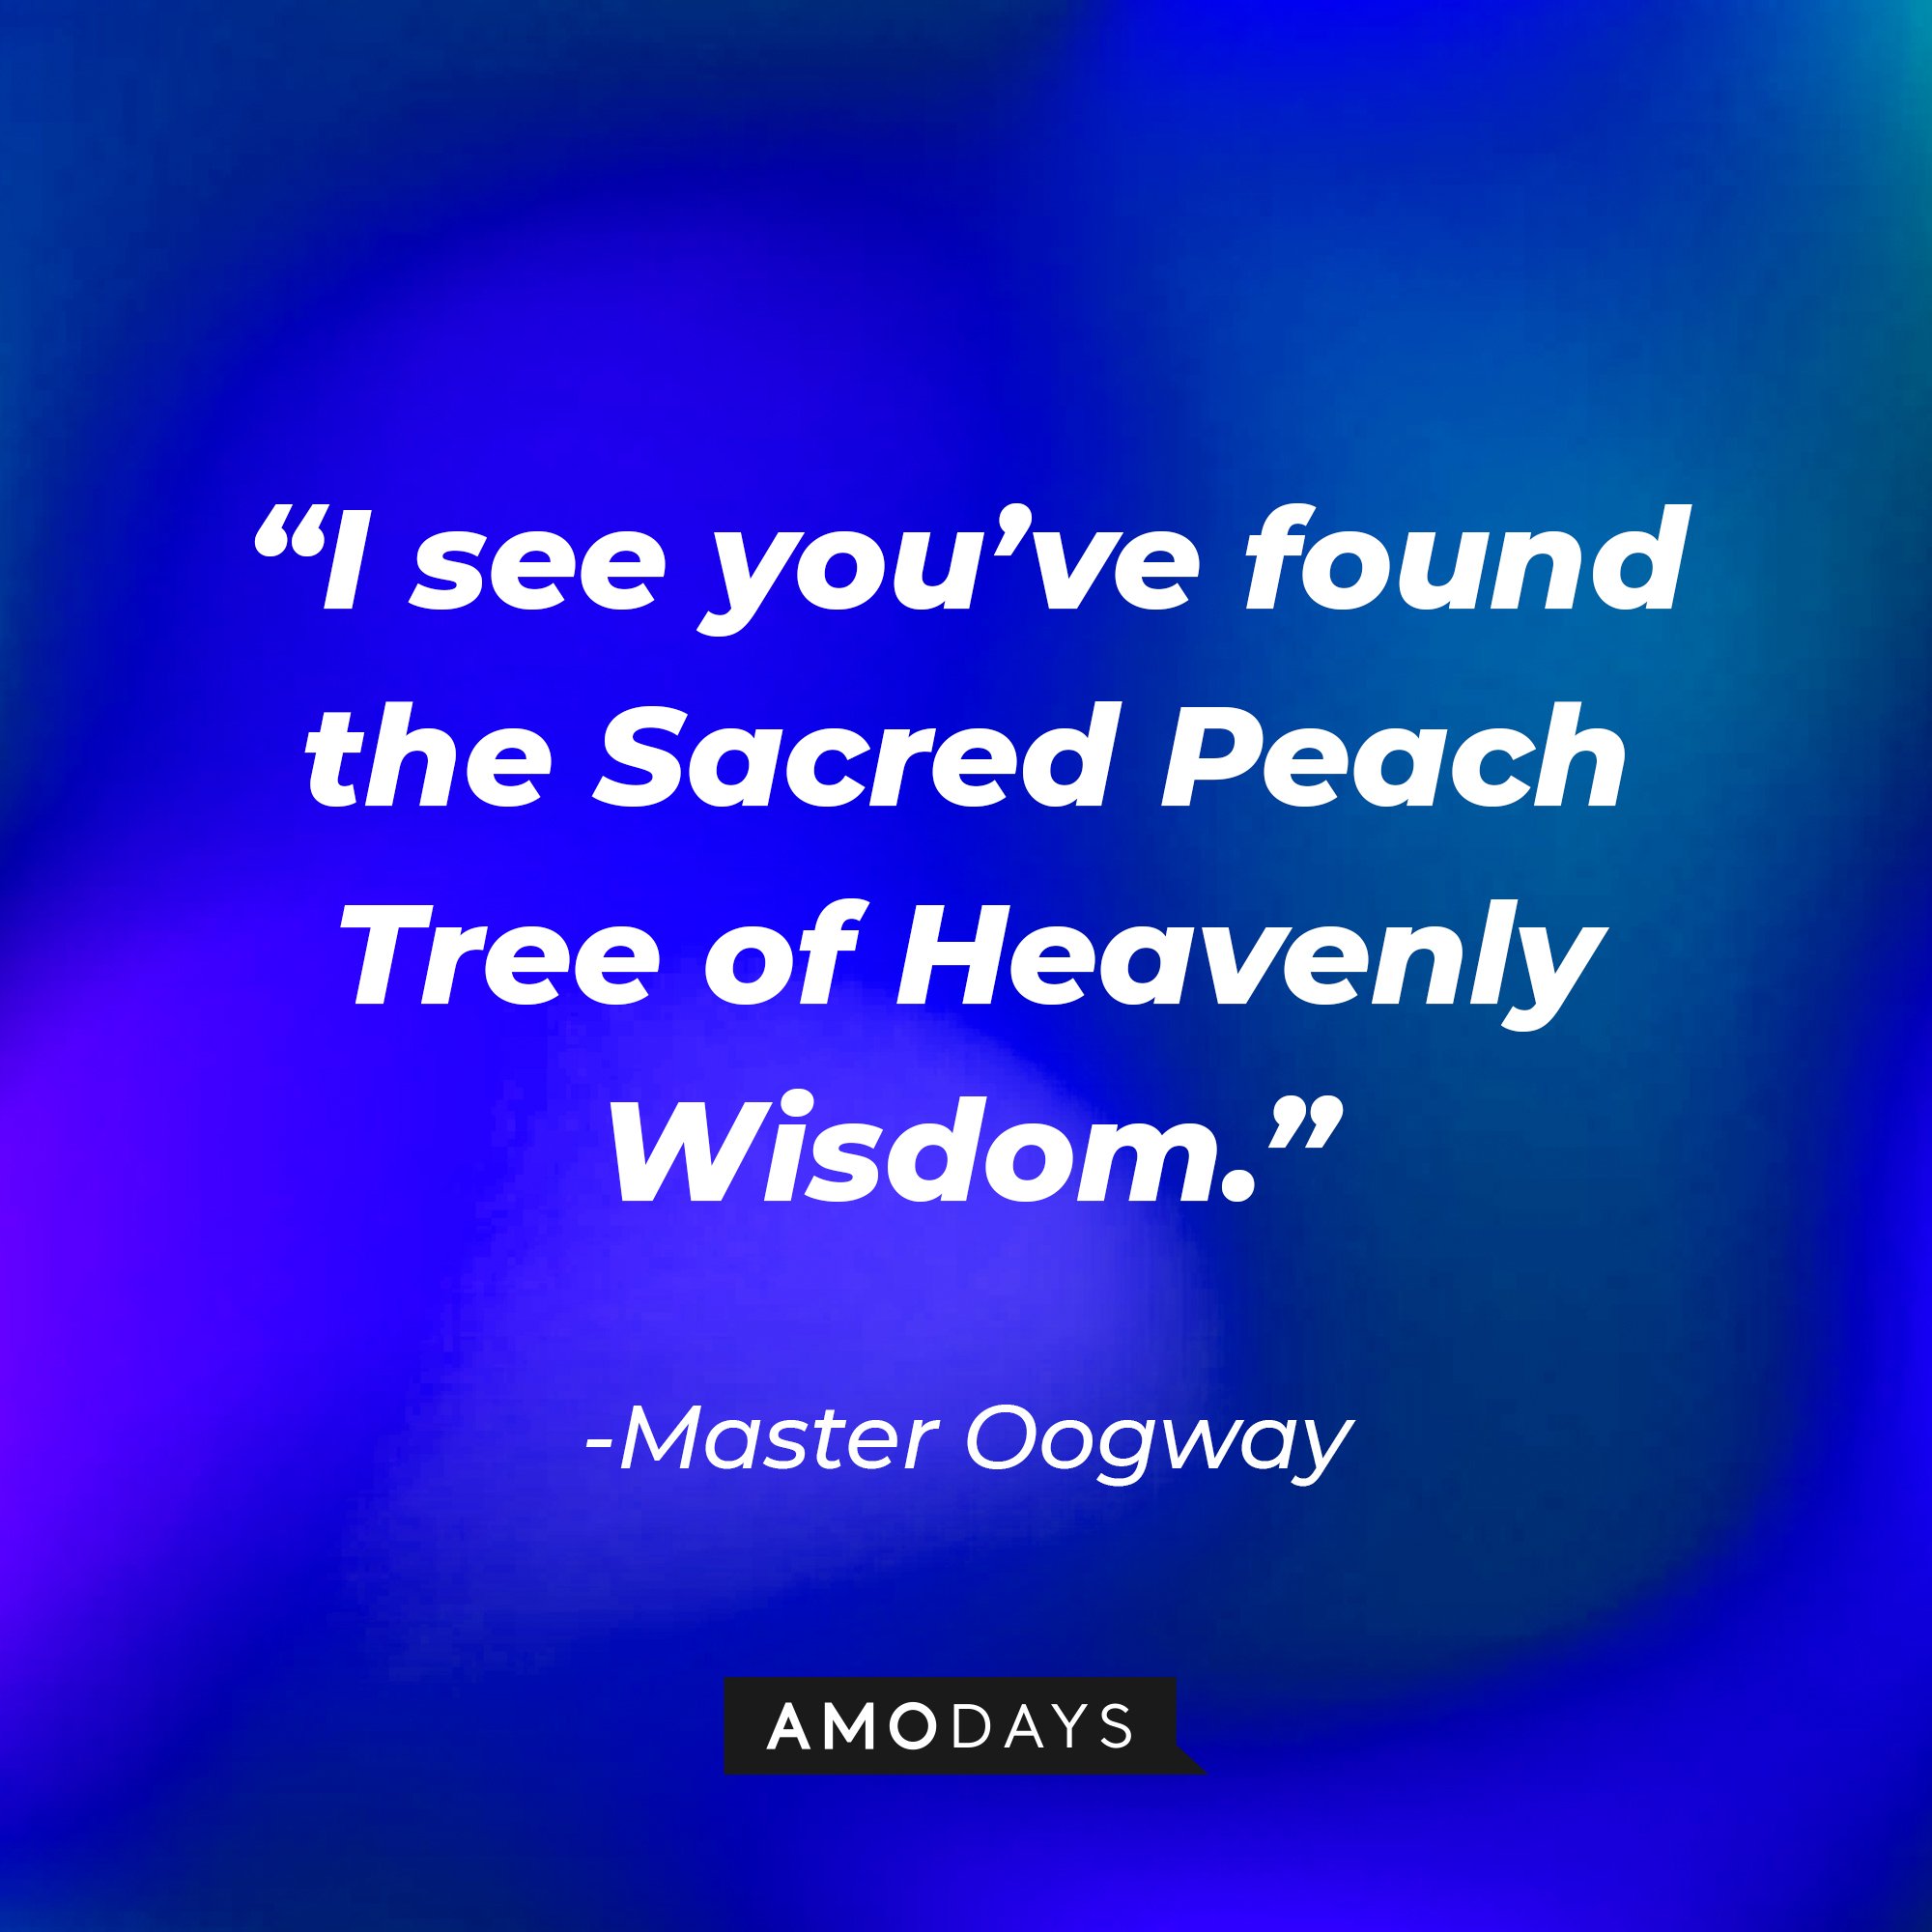 Master Oogway's quote: “I see you’ve found the Sacred Peach Tree of Heavenly Wisdom.” | Image: AmoDays